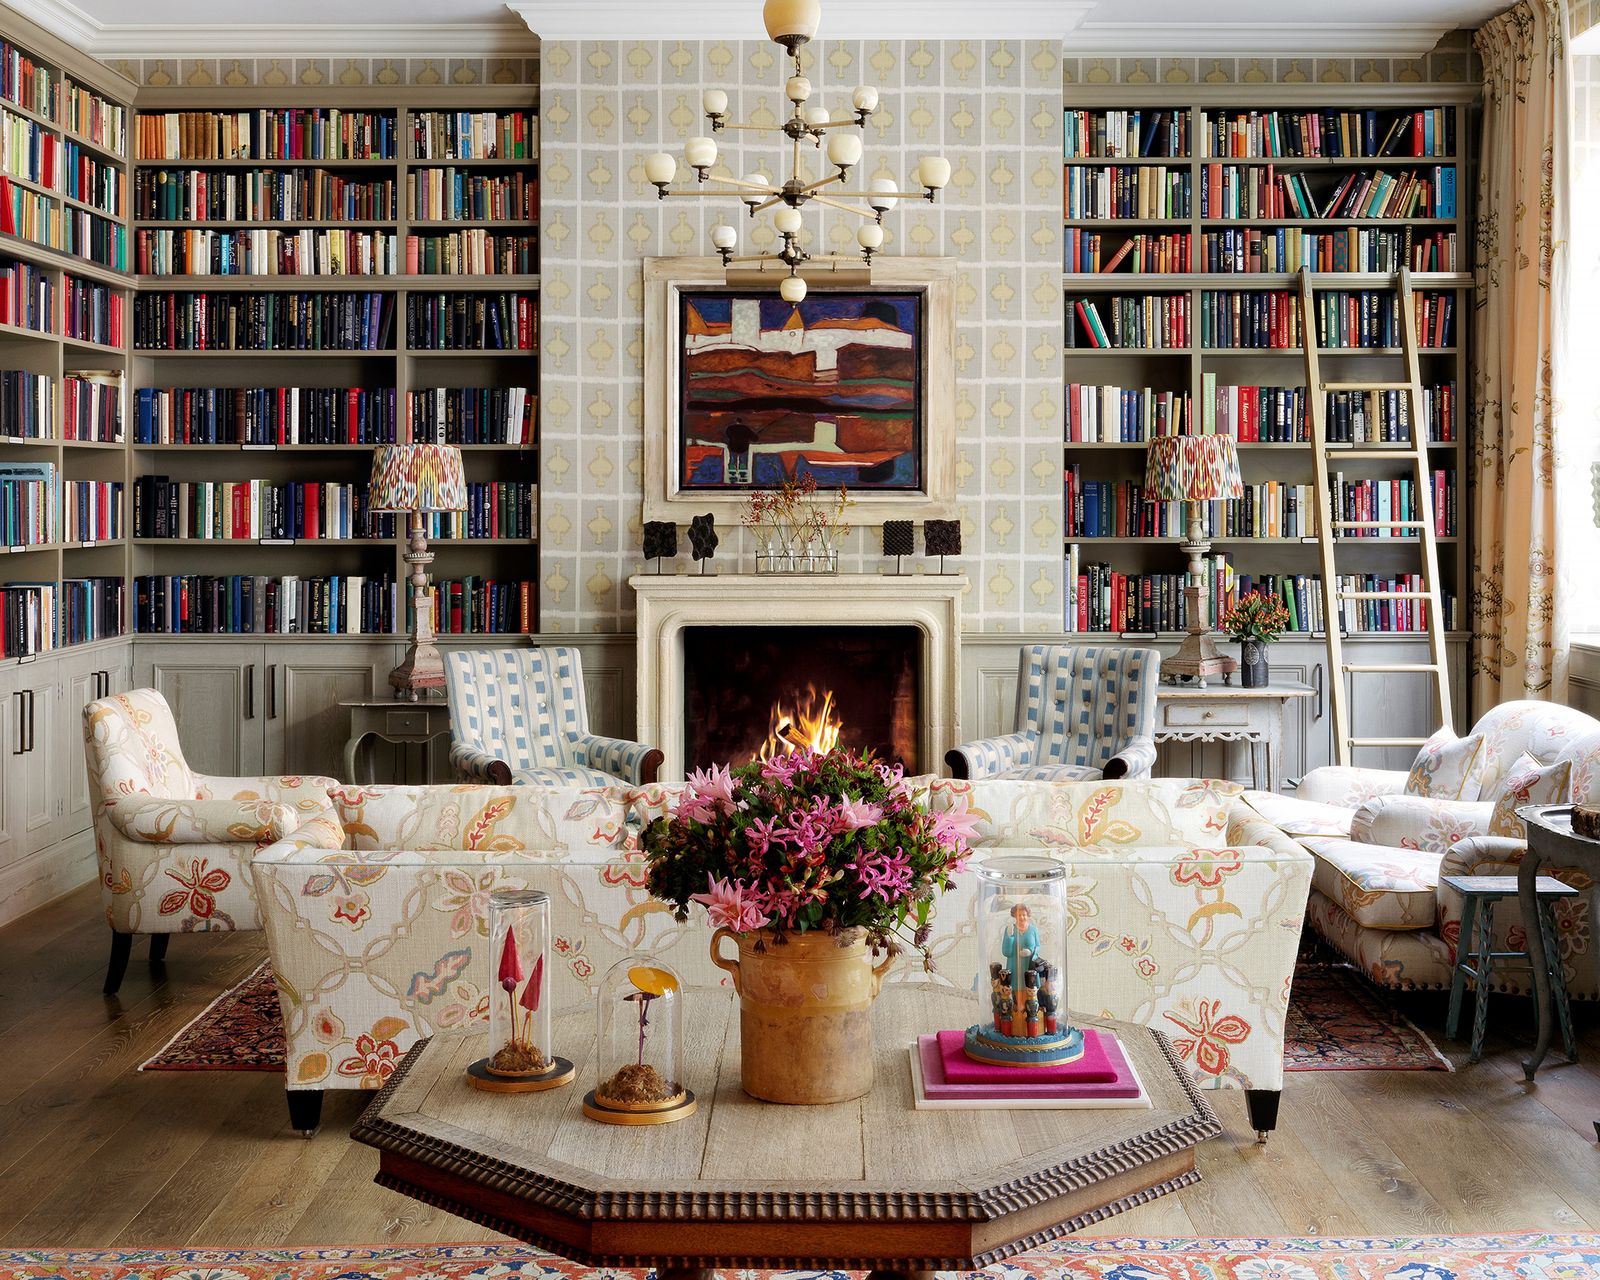 Will a library add value to a home? Experts explain | Homes & Gardens